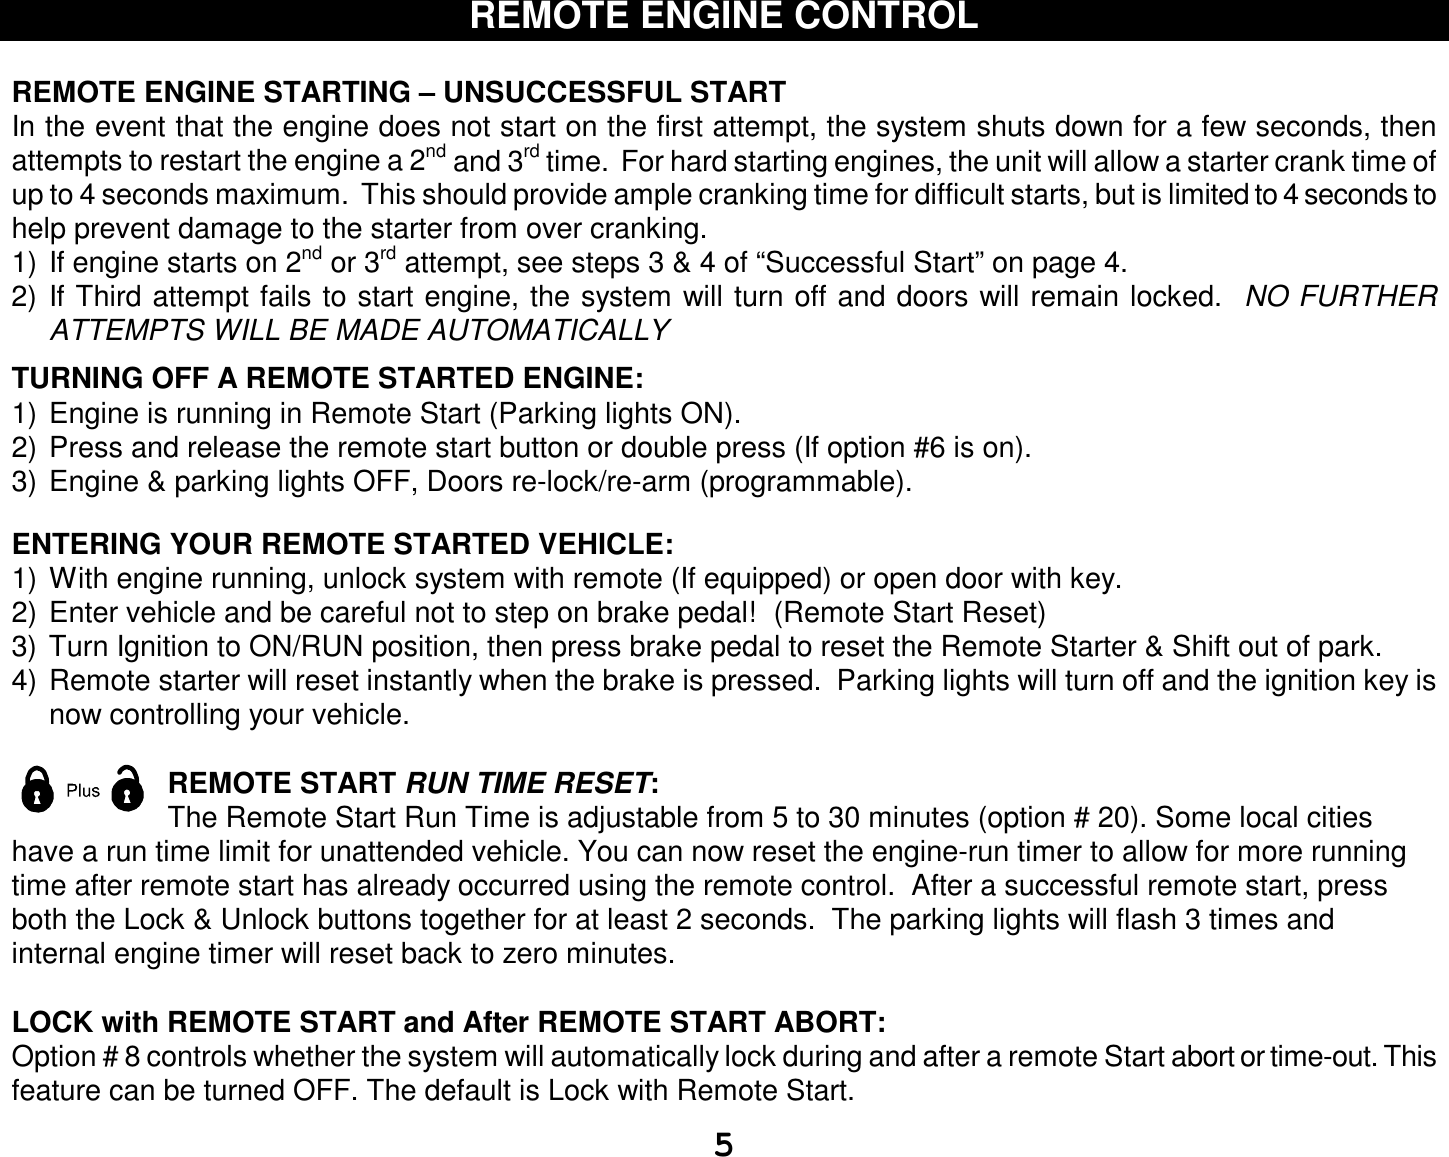  5 REMOTE ENGINE CONTROL  REMOTE ENGINE STARTING – UNSUCCESSFUL START In the event that the engine does not start on the first attempt, the system shuts down for a few seconds, then attempts to restart the engine a 2nd and 3rd time.  For hard starting engines, the unit will allow a starter crank time of up to 4 seconds maximum.  This should provide ample cranking time for difficult starts, but is limited to 4 seconds to help prevent damage to the starter from over cranking. 1) If engine starts on 2nd or 3rd attempt, see steps 3 &amp; 4 of “Successful Start” on page 4. 2) If Third attempt fails to start engine, the system will turn off and doors will remain locked.  NO FURTHER ATTEMPTS WILL BE MADE AUTOMATICALLY  TURNING OFF A REMOTE STARTED ENGINE: 1) Engine is running in Remote Start (Parking lights ON). 2) Press and release the remote start button or double press (If option #6 is on).  3) Engine &amp; parking lights OFF, Doors re-lock/re-arm (programmable).   ENTERING YOUR REMOTE STARTED VEHICLE: 1) With engine running, unlock system with remote (If equipped) or open door with key. 2) Enter vehicle and be careful not to step on brake pedal!  (Remote Start Reset) 3) Turn Ignition to ON/RUN position, then press brake pedal to reset the Remote Starter &amp; Shift out of park. 4) Remote starter will reset instantly when the brake is pressed.  Parking lights will turn off and the ignition key is now controlling your vehicle.  REMOTE START RUN TIME RESET: The Remote Start Run Time is adjustable from 5 to 30 minutes (option # 20). Some local cities have a run time limit for unattended vehicle. You can now reset the engine-run timer to allow for more running time after remote start has already occurred using the remote control.  After a successful remote start, press both the Lock &amp; Unlock buttons together for at least 2 seconds.  The parking lights will flash 3 times and internal engine timer will reset back to zero minutes.  LOCK with REMOTE START and After REMOTE START ABORT: Option # 8 controls whether the system will automatically lock during and after a remote Start abort or time-out. This feature can be turned OFF. The default is Lock with Remote Start. 